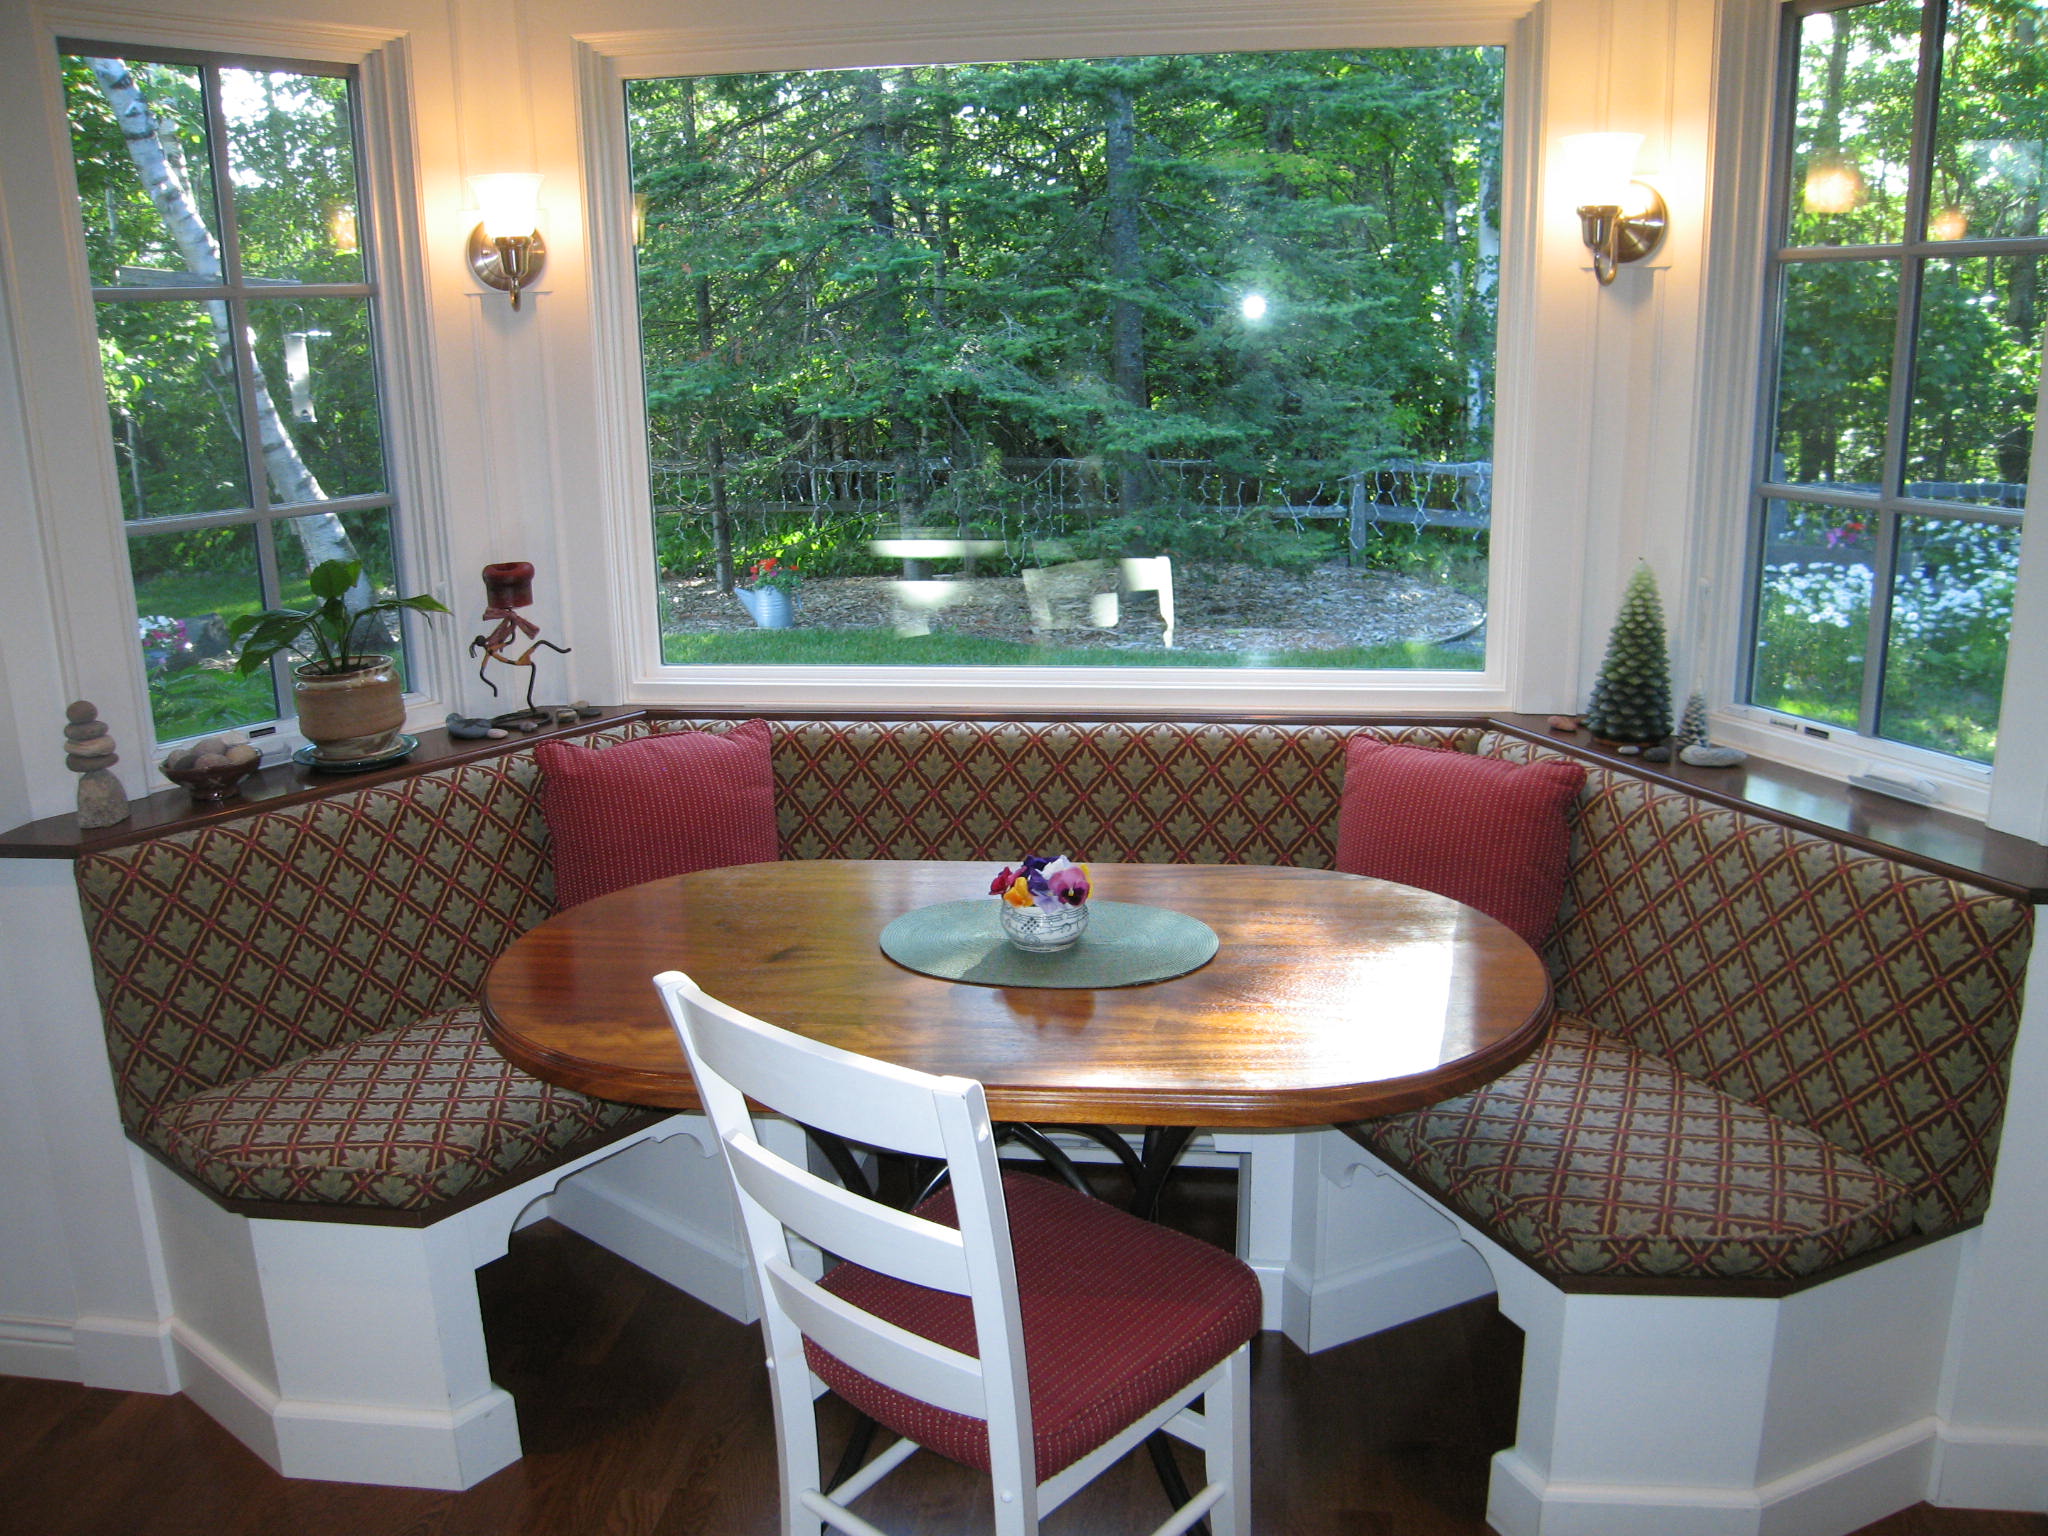 BANQUETTE SEATING MAXIMIZE FAMILY TOGETHERNESS IN THE KITCHEN |